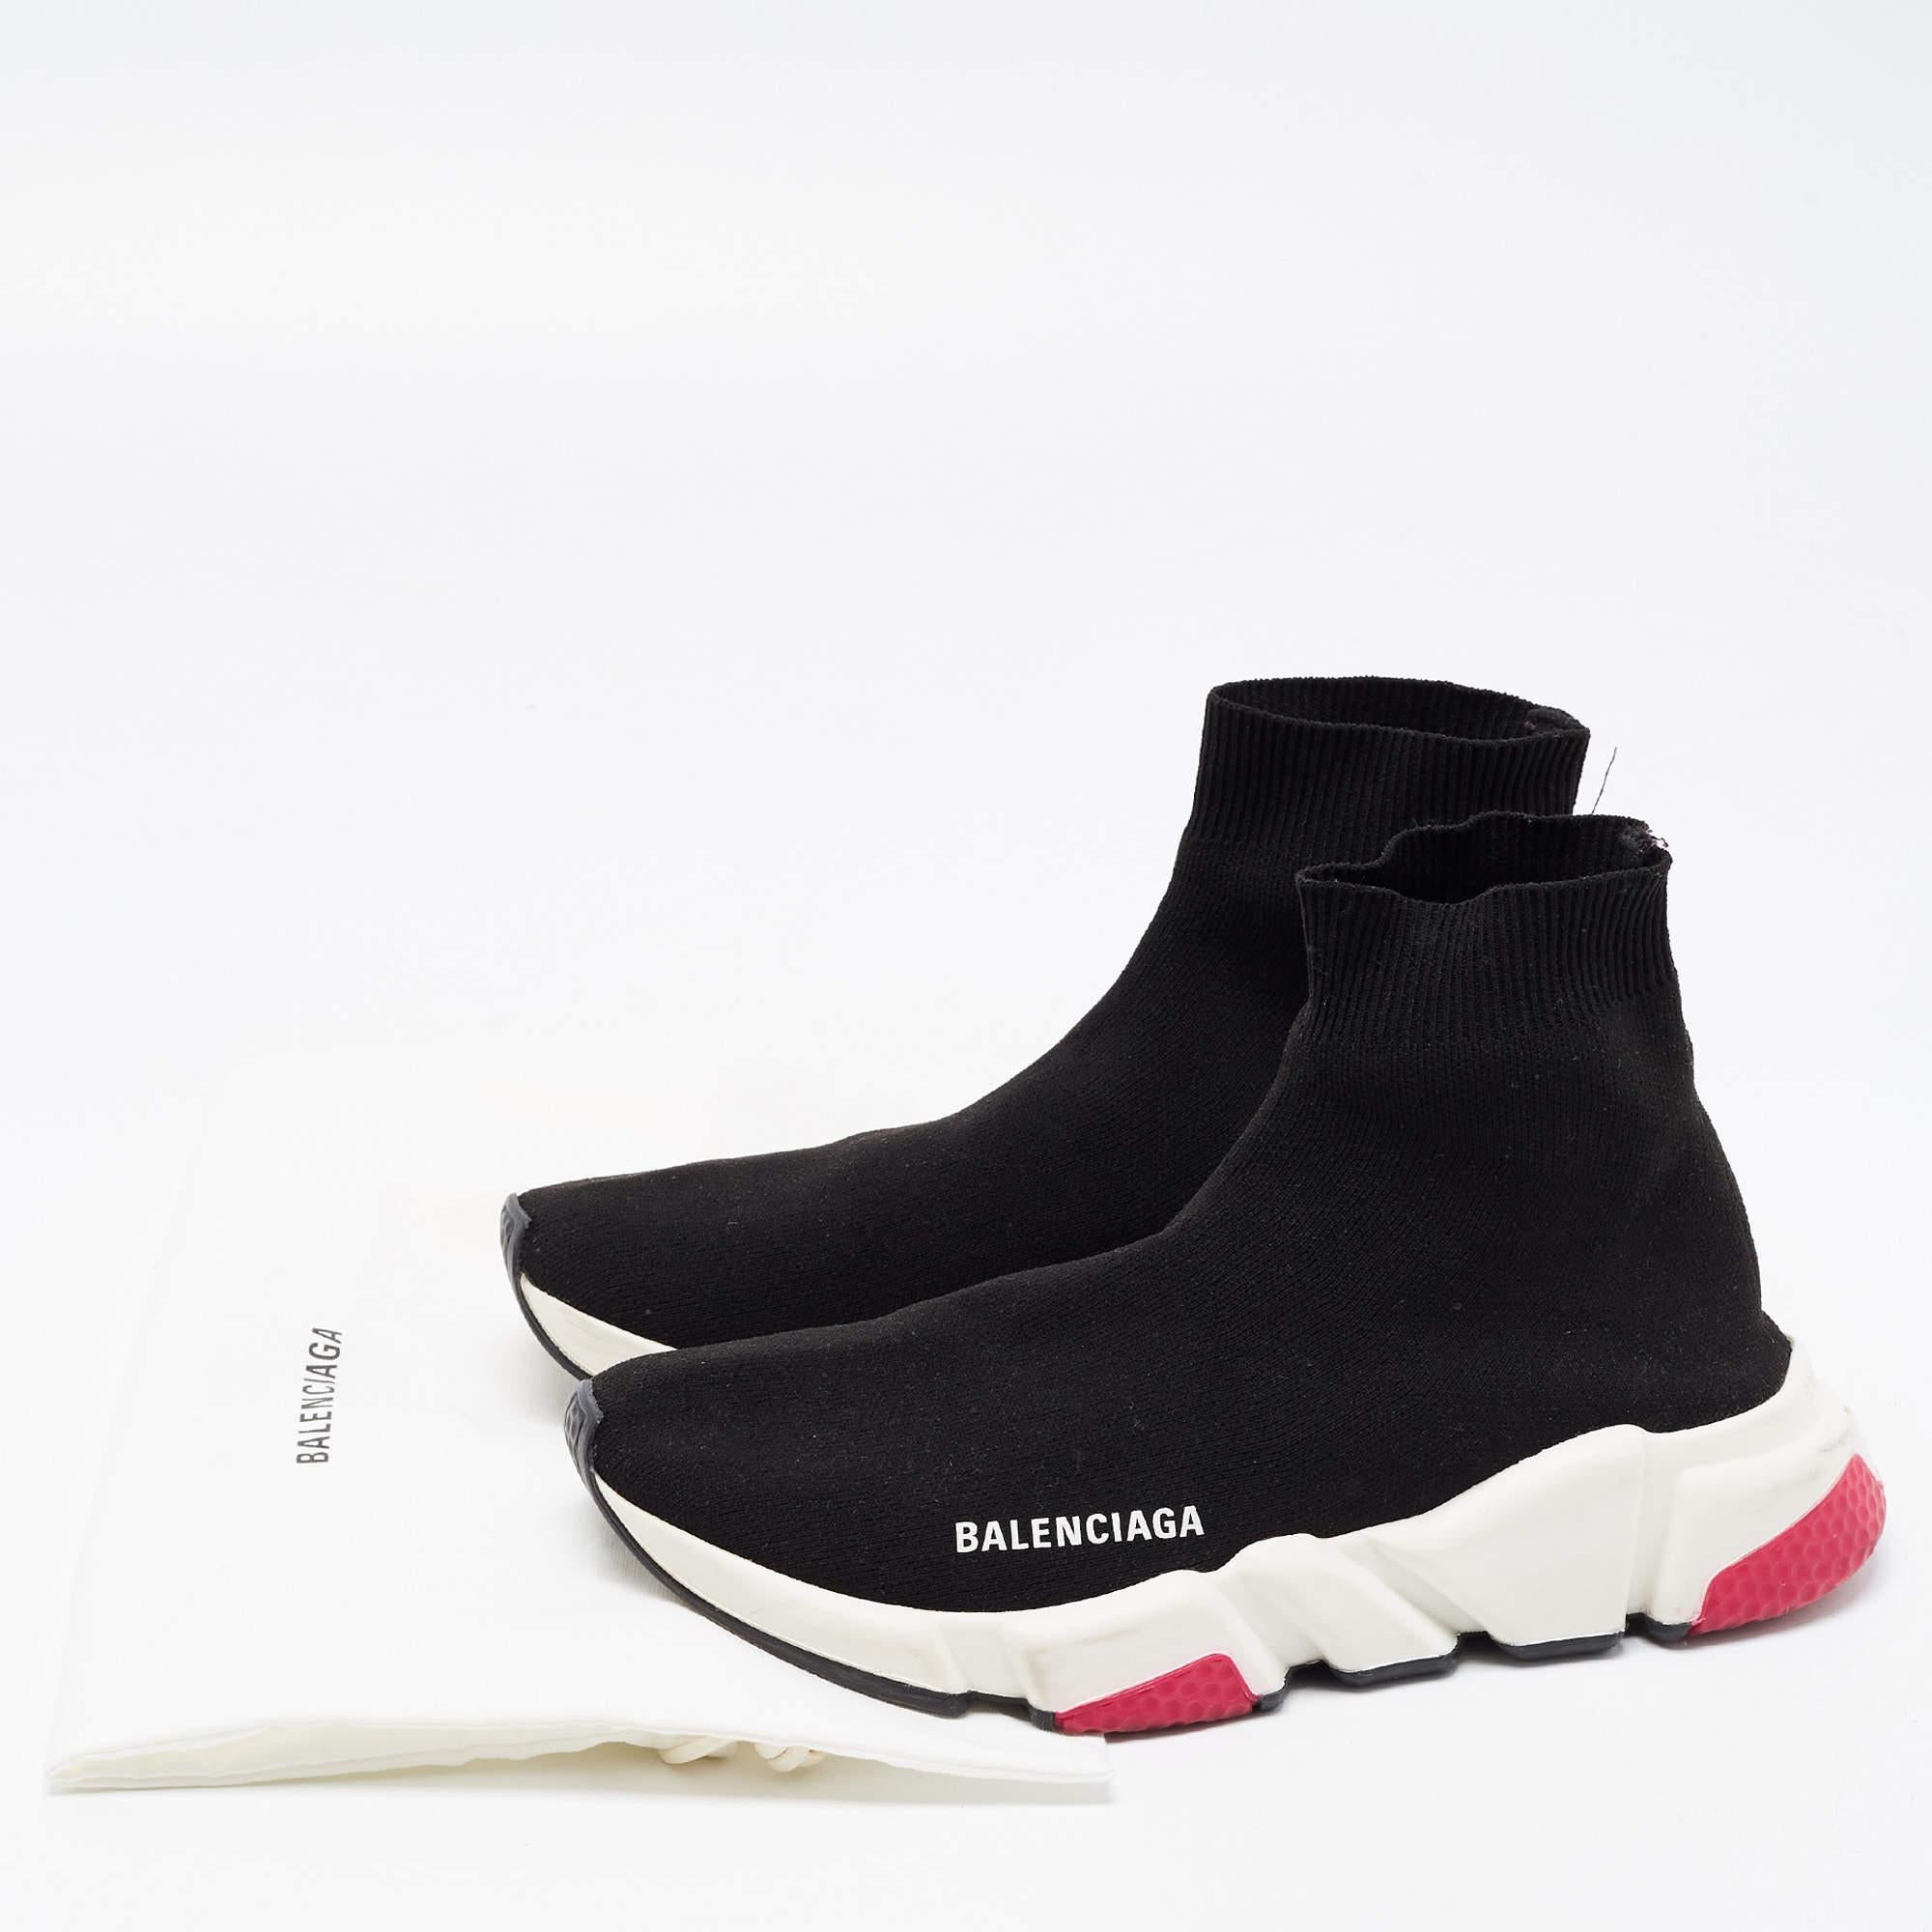 Balenciaga Black Knit Fabric Speed Trainer Sneakers Size 38 6